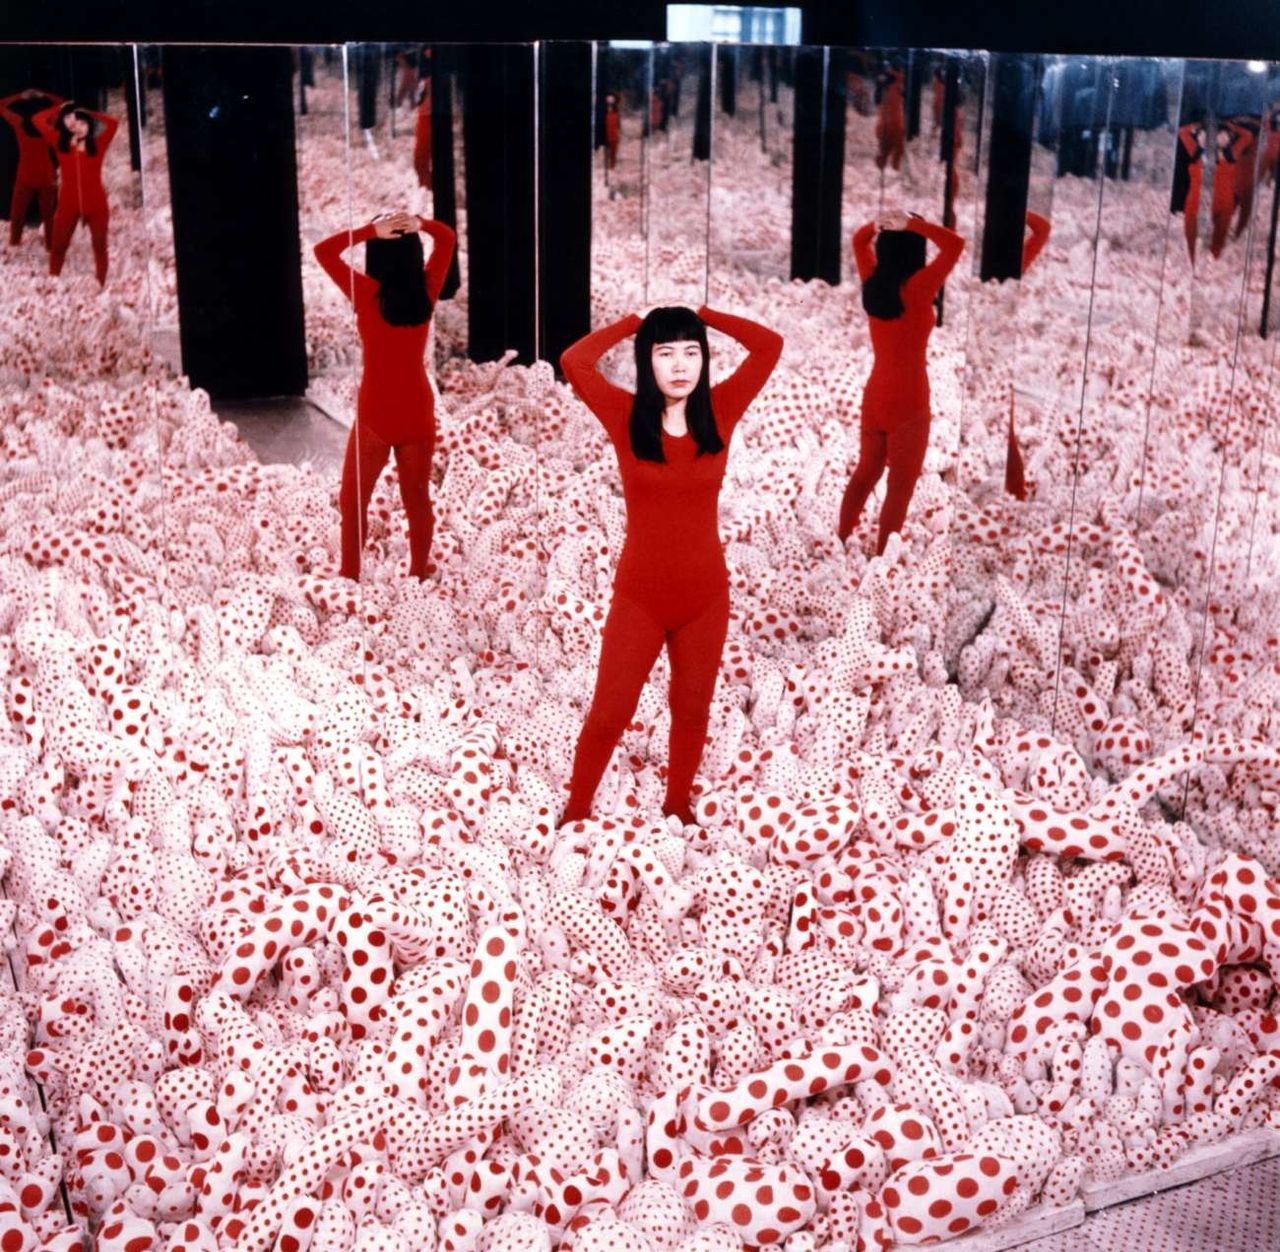 An Introduction To The Immersive Art By Yayoi Kusama - Solo Travel